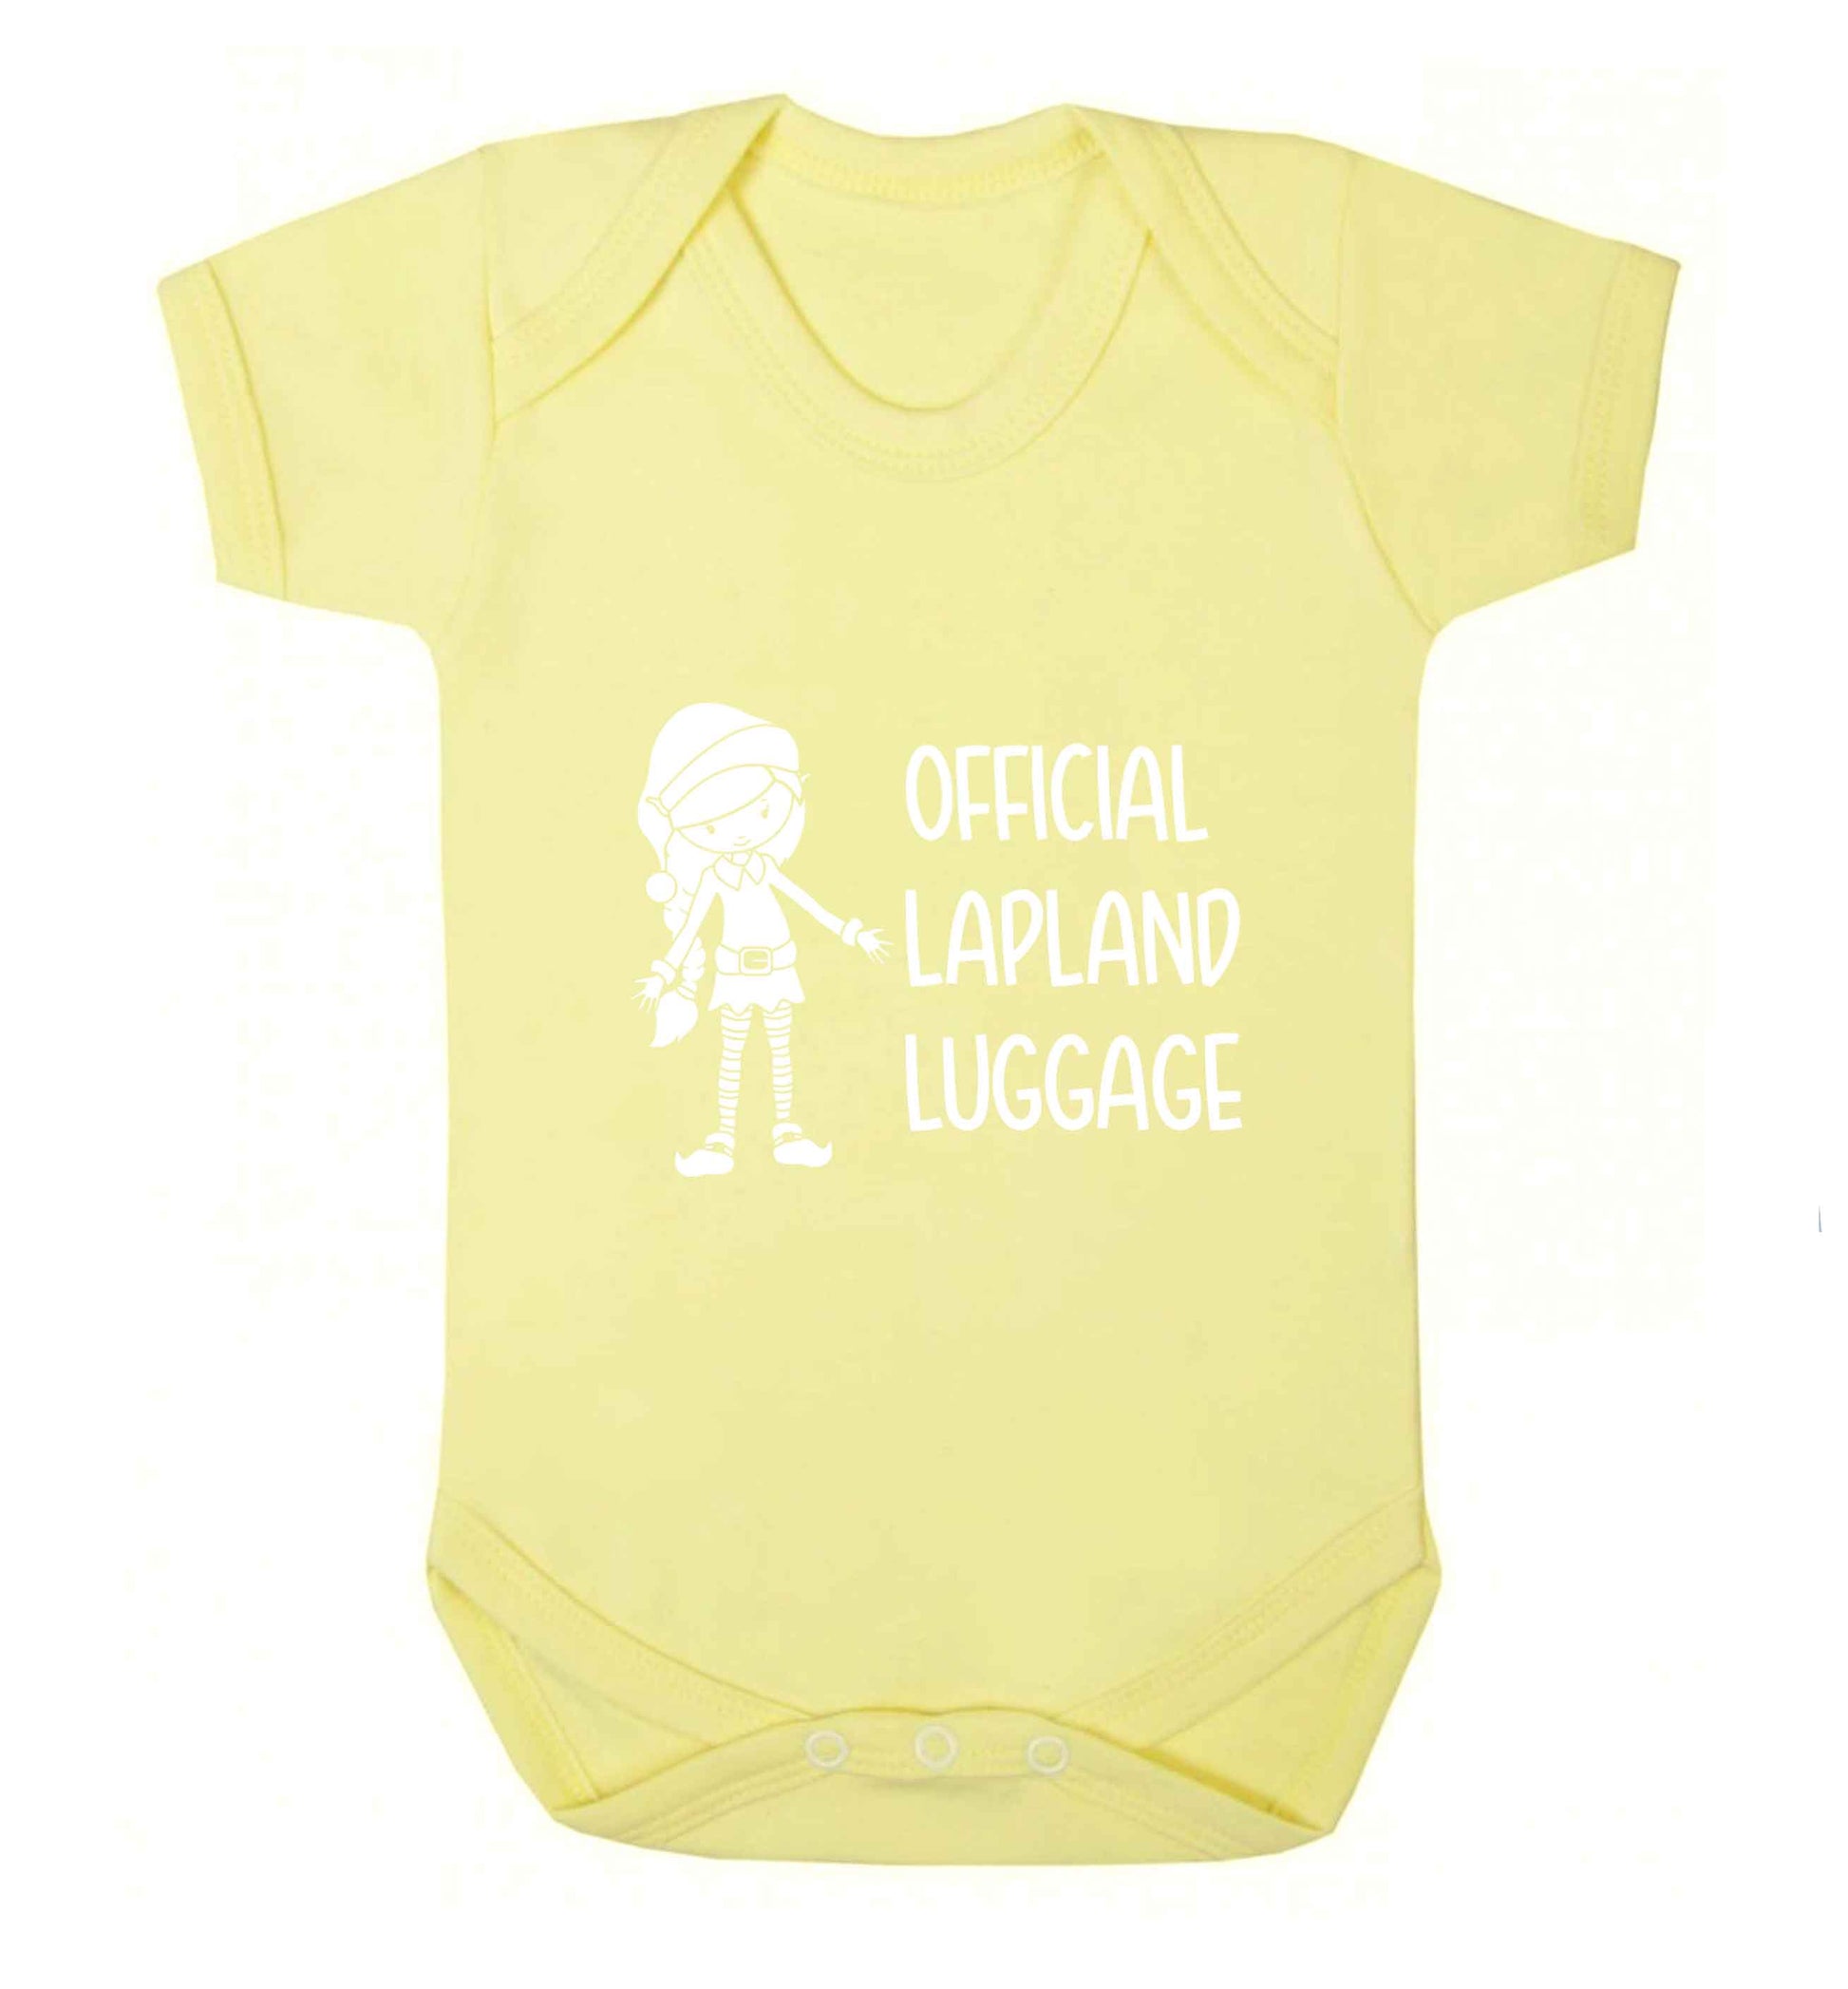 Official lapland luggage - Elf snowflake baby vest pale yellow 18-24 months